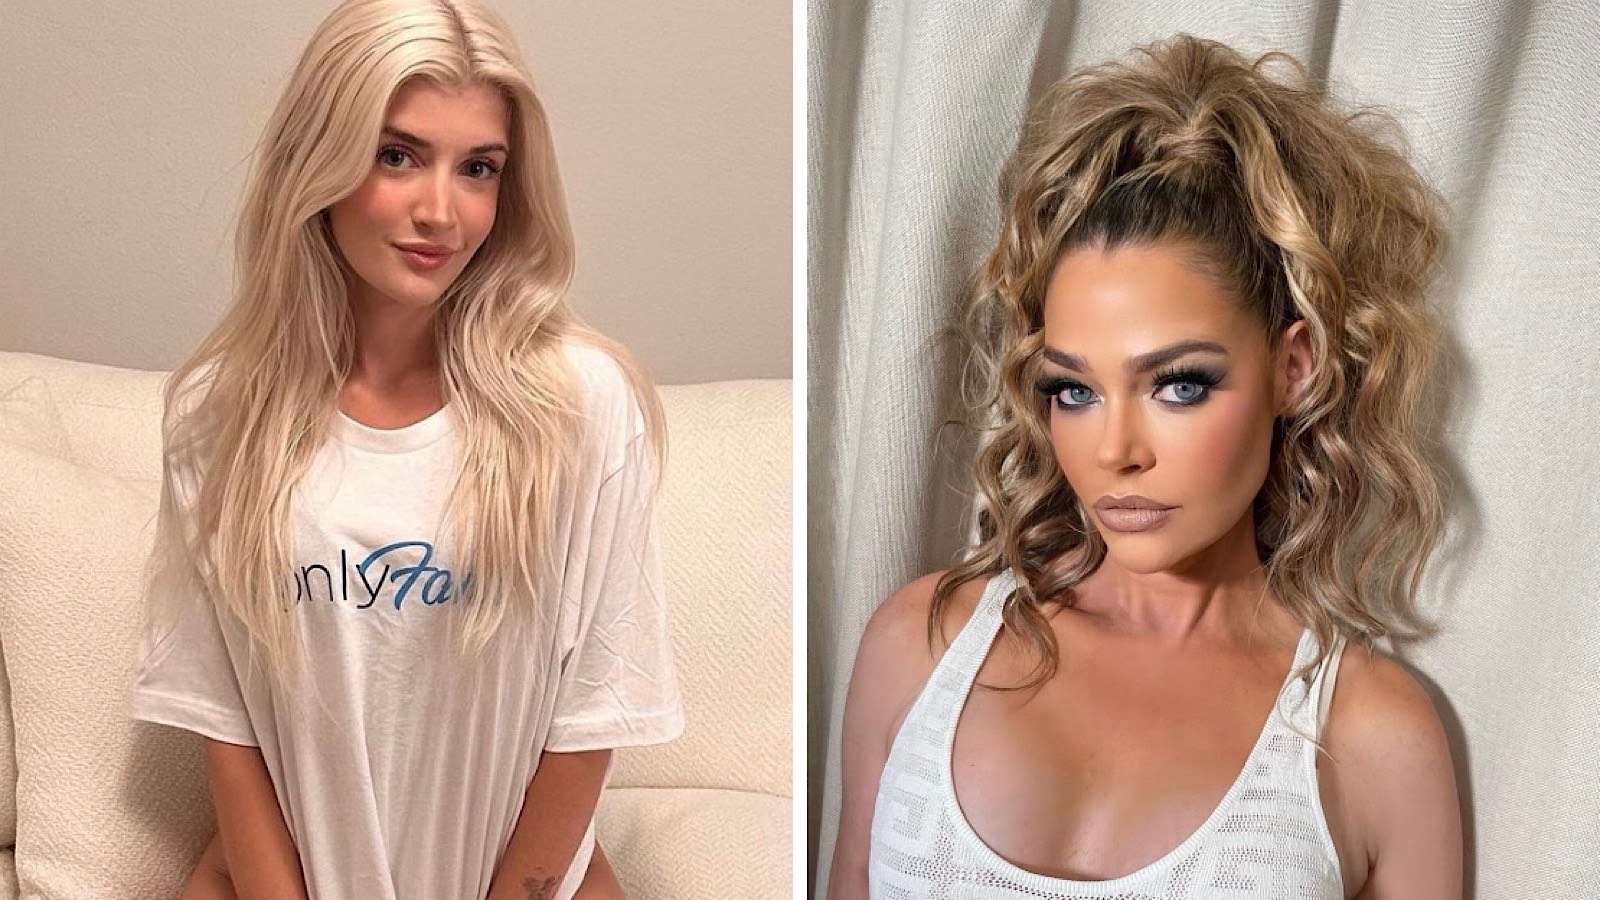 Denise Richards and her teenage daughter might be working together on "another" OnlyFans collaboration.